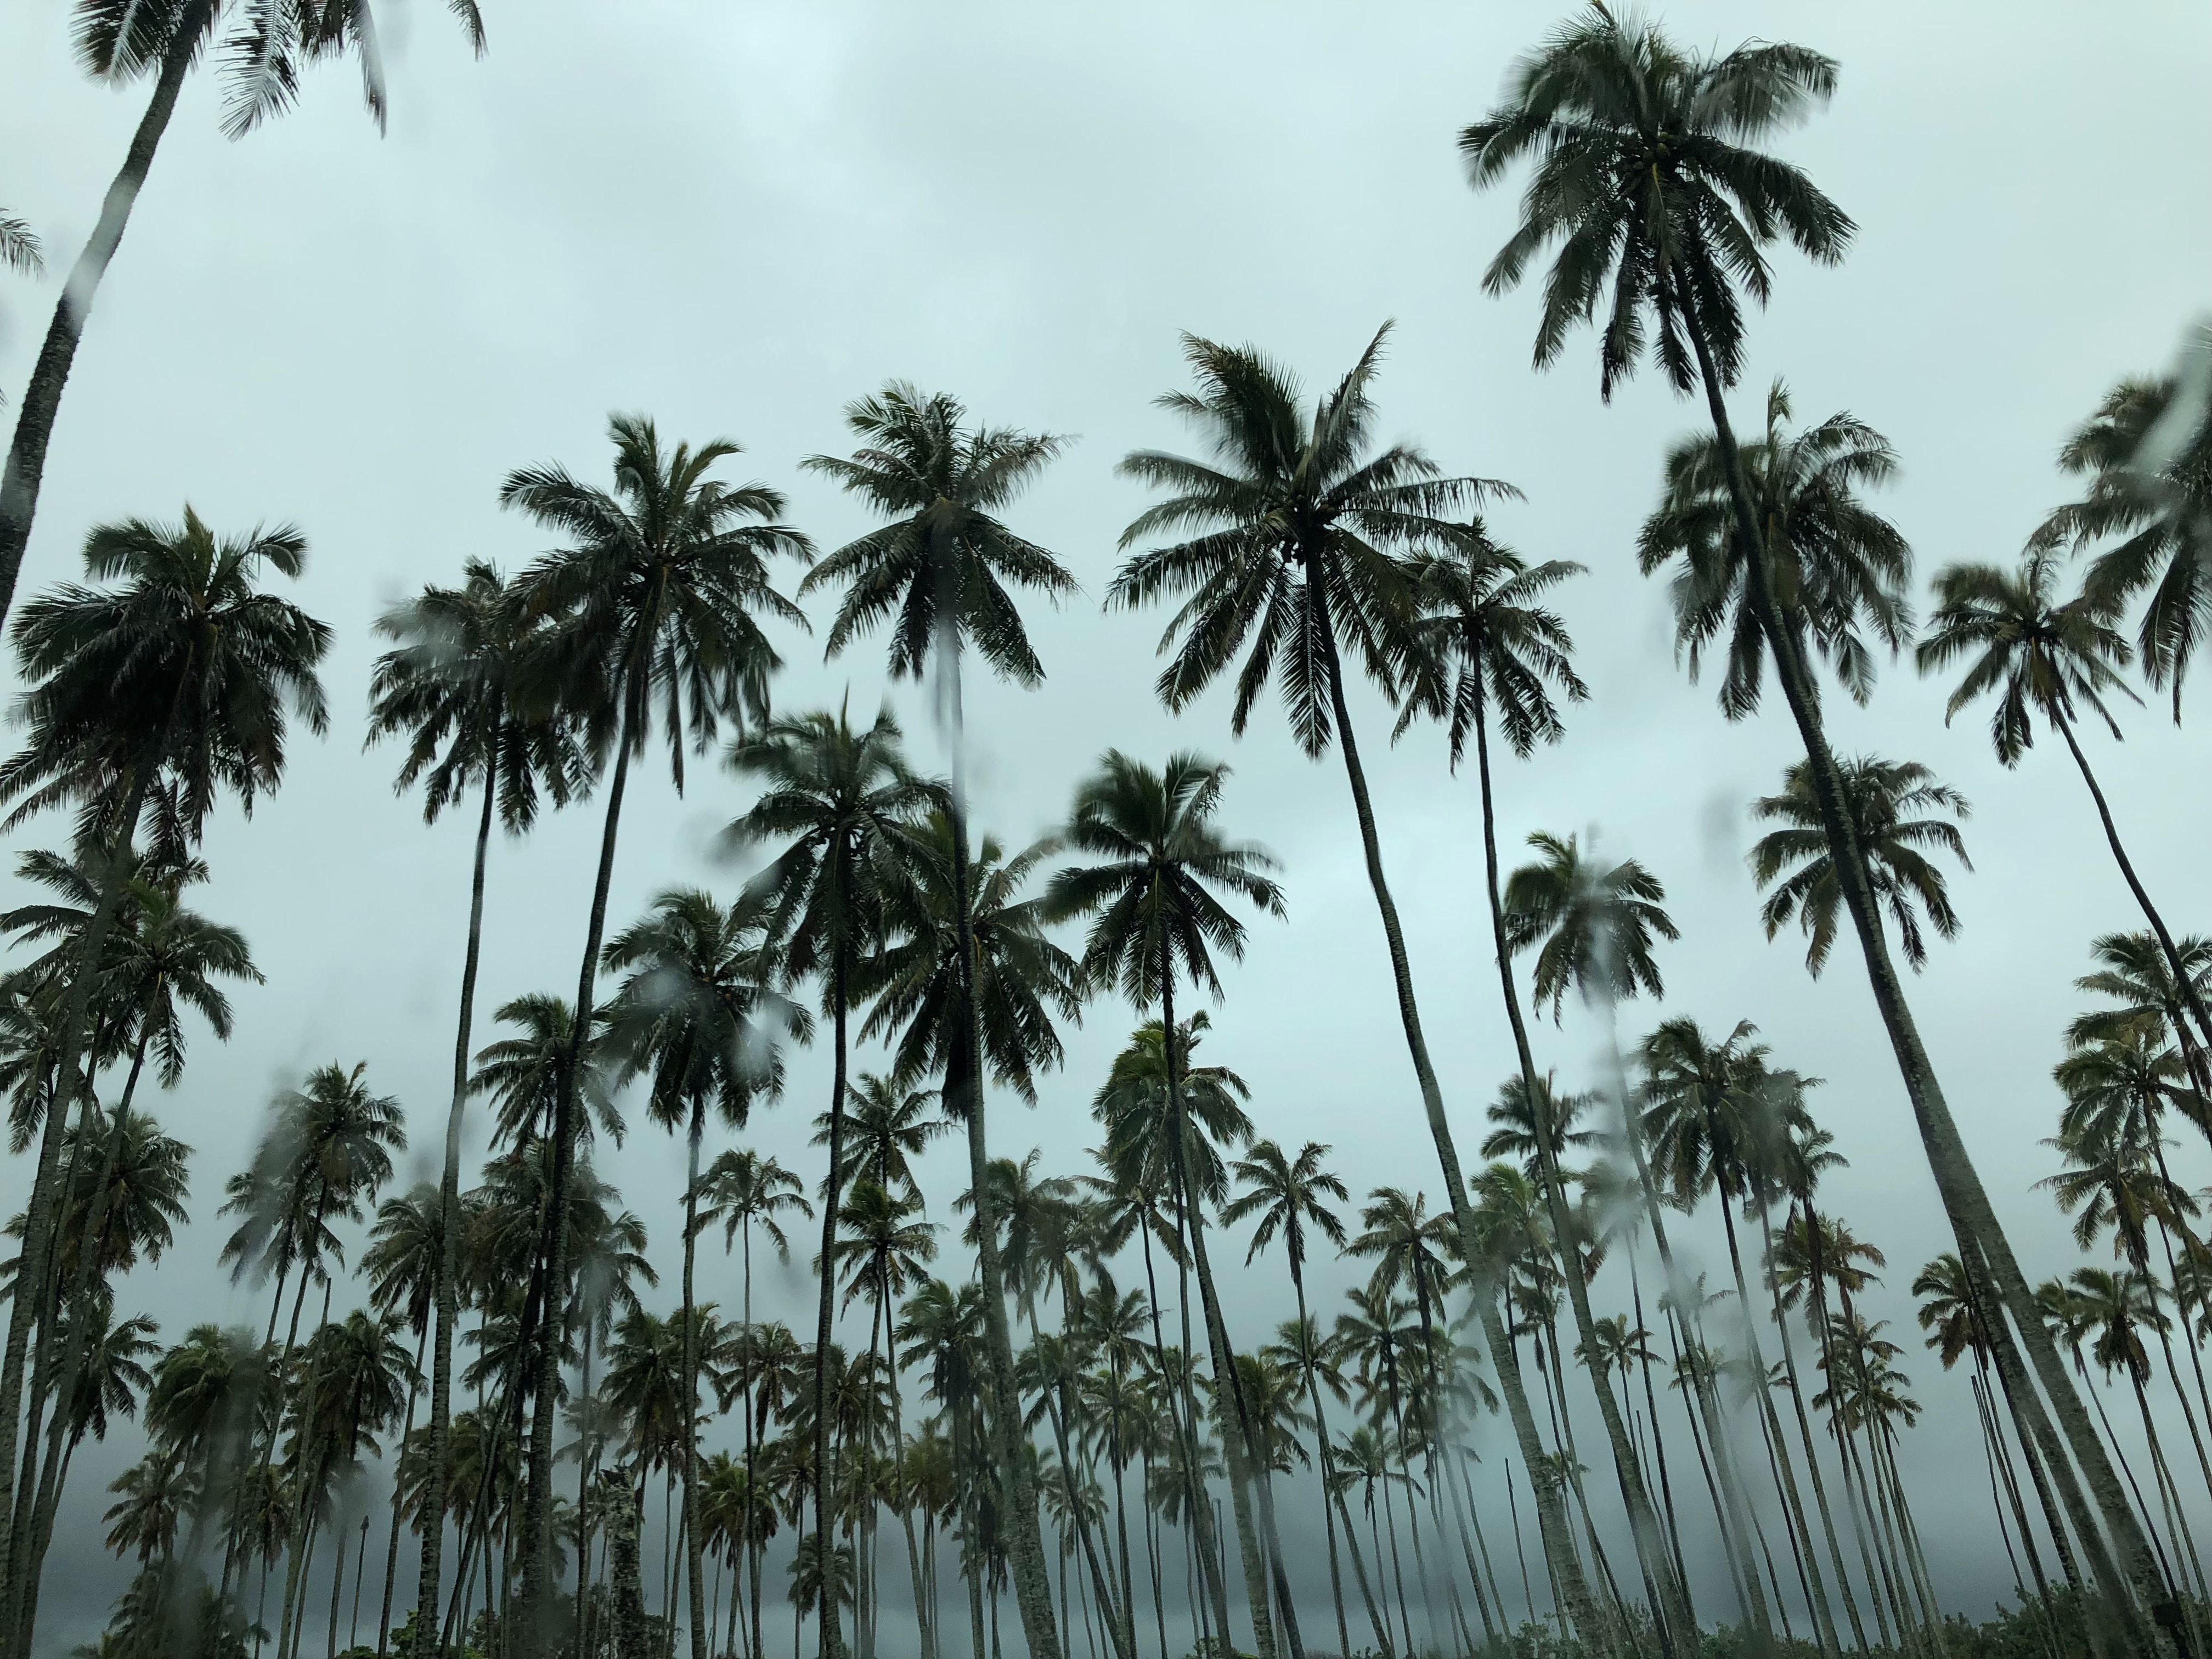 4032x3024 #arecaceae, #Free , #summer, #kauai, #outdoors, #tumblr background, #computer background, #palm tree, #hd background, #background, #hawaii, #tree, #vegetation, #hd wallpaper, #coconut trees, #nature, #plant, #tropical